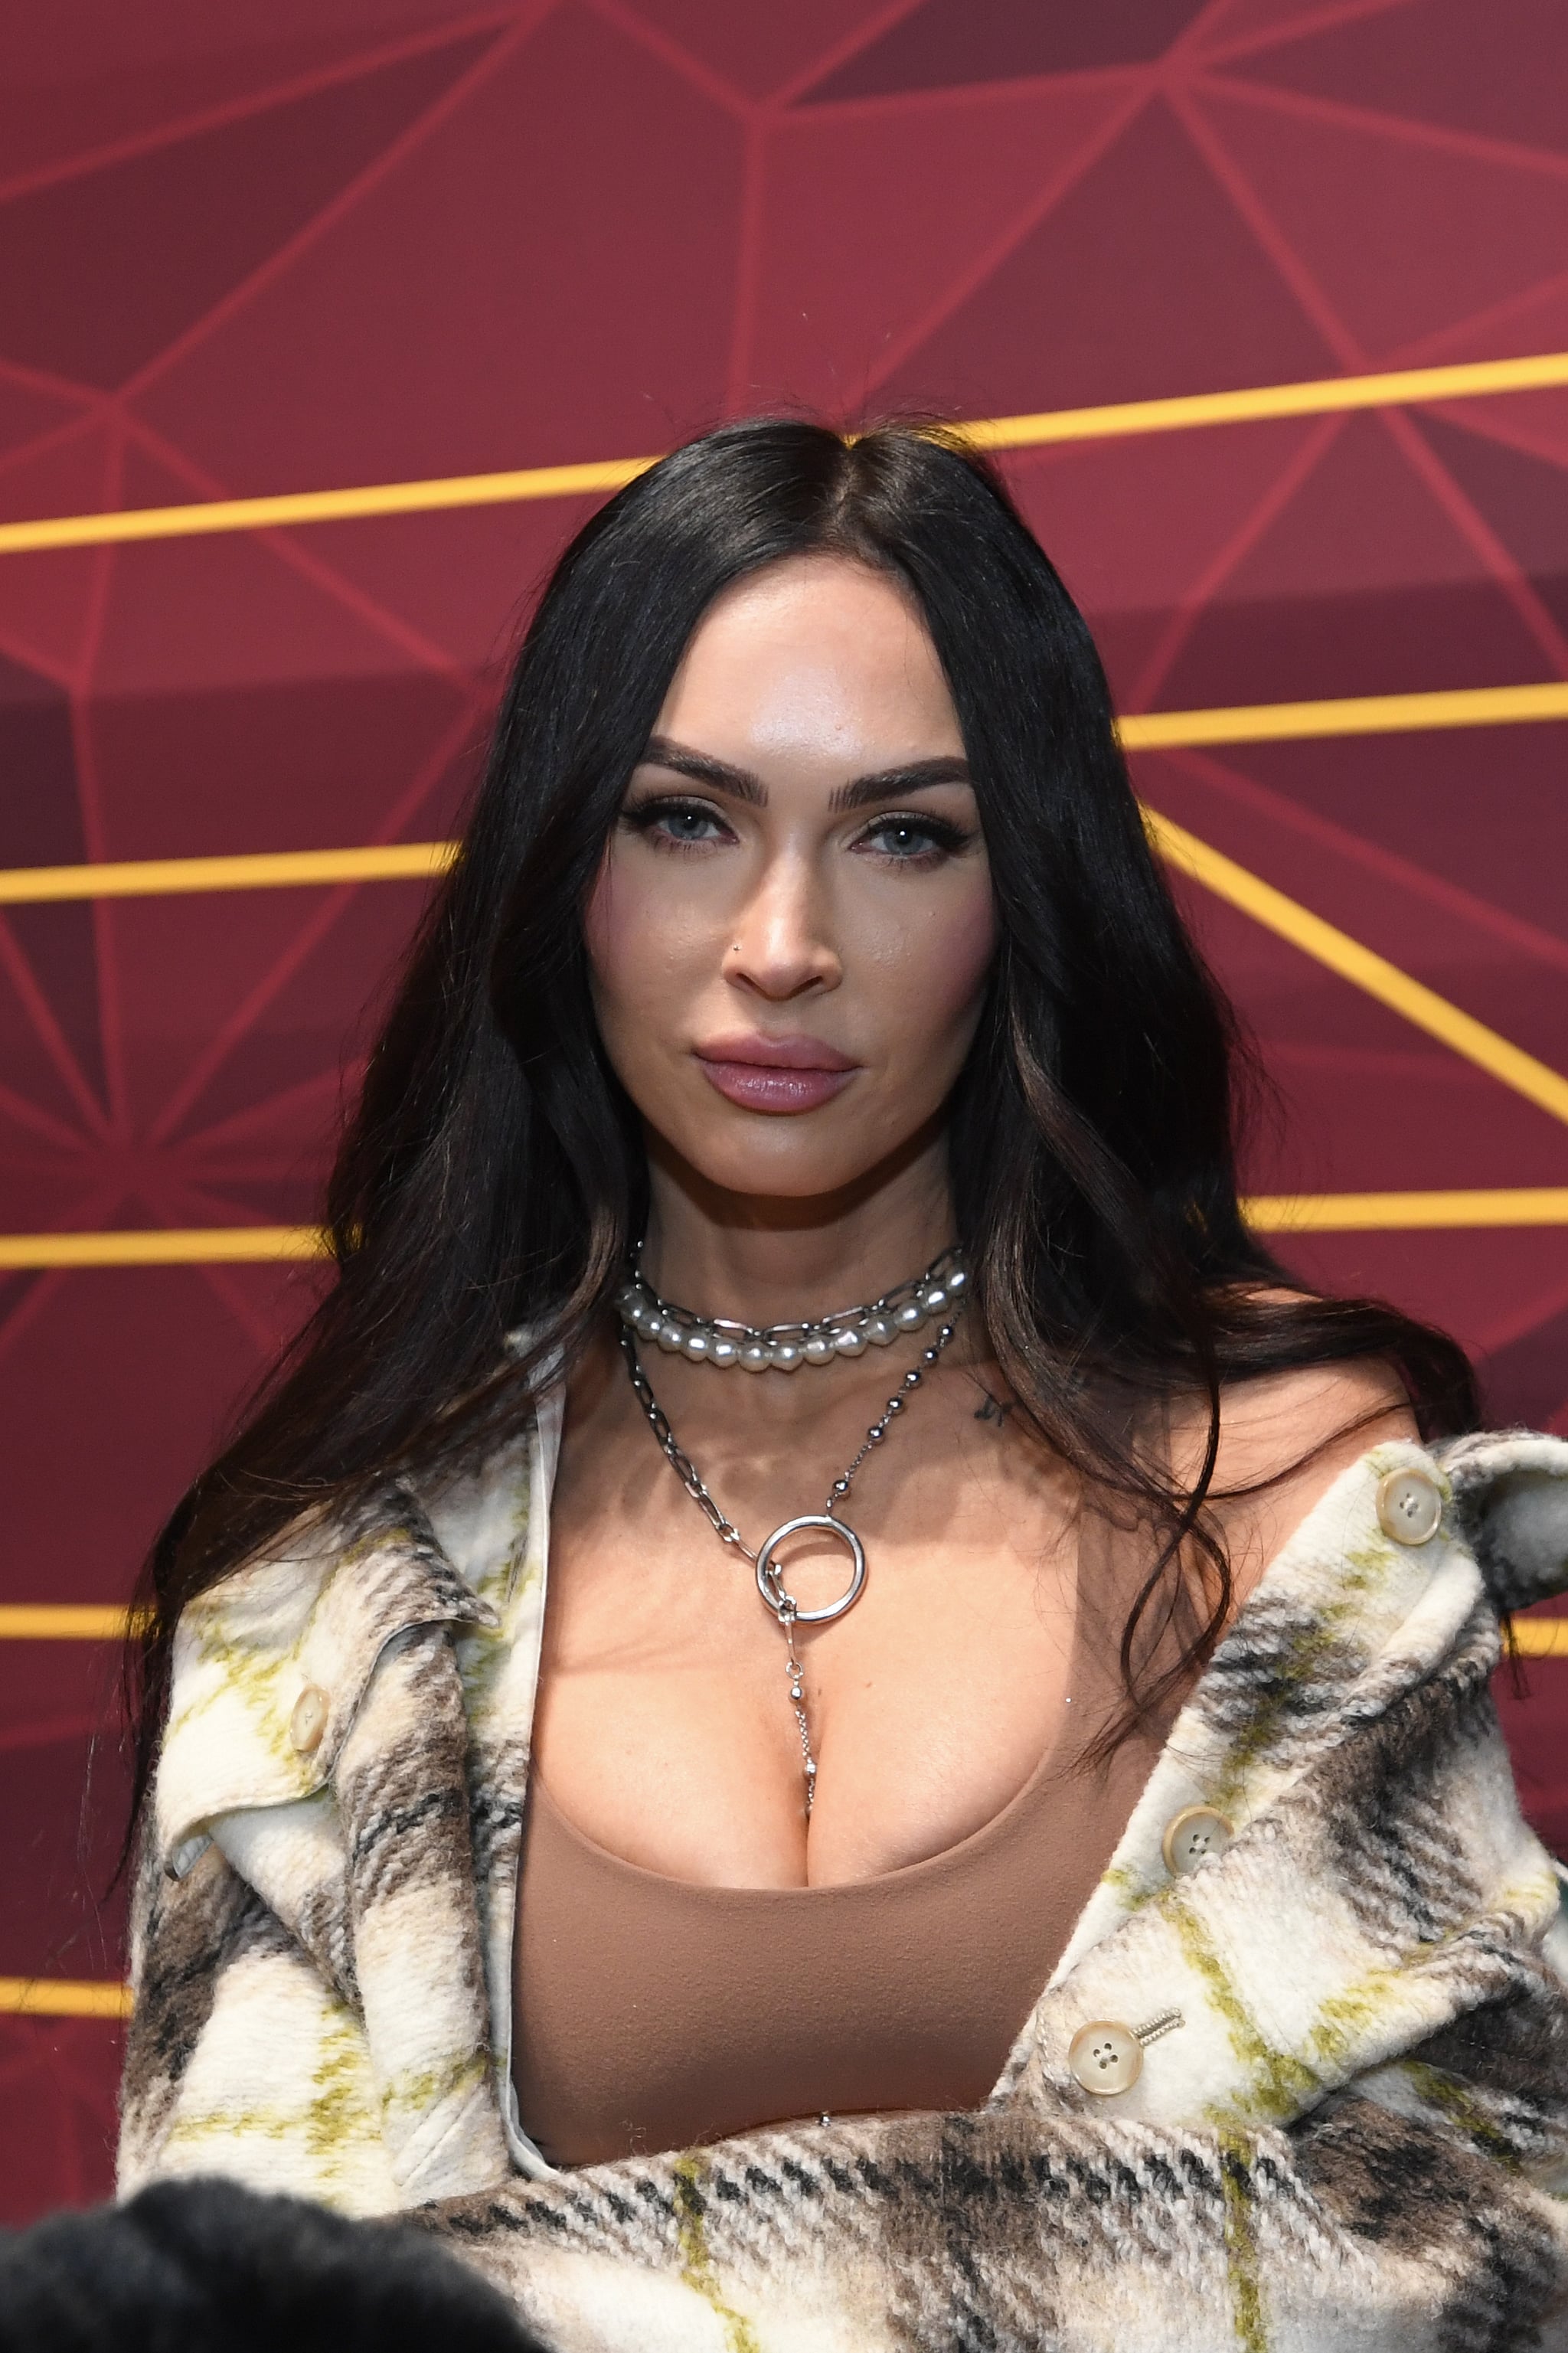 CLEVELAND, OH - FEBRUARY 18: Megan Fox attends the Ruffles NBA All-Star Celebrity Game as part of 2022 NBA All Star Weekend on Friday, February 18, 2022 at Wolstein Centre in Cleveland, Ohio. NOTE TO USER: User expressly acknowledges and agrees that, by downloading and/or using this Photograph, user is consenting to the terms and conditions of the Getty Images Licence Agreement. Mandatory Copyright Notice: Copyright 2022 NBAE (Photo by Juan Ocampo/NBAE via Getty Images)